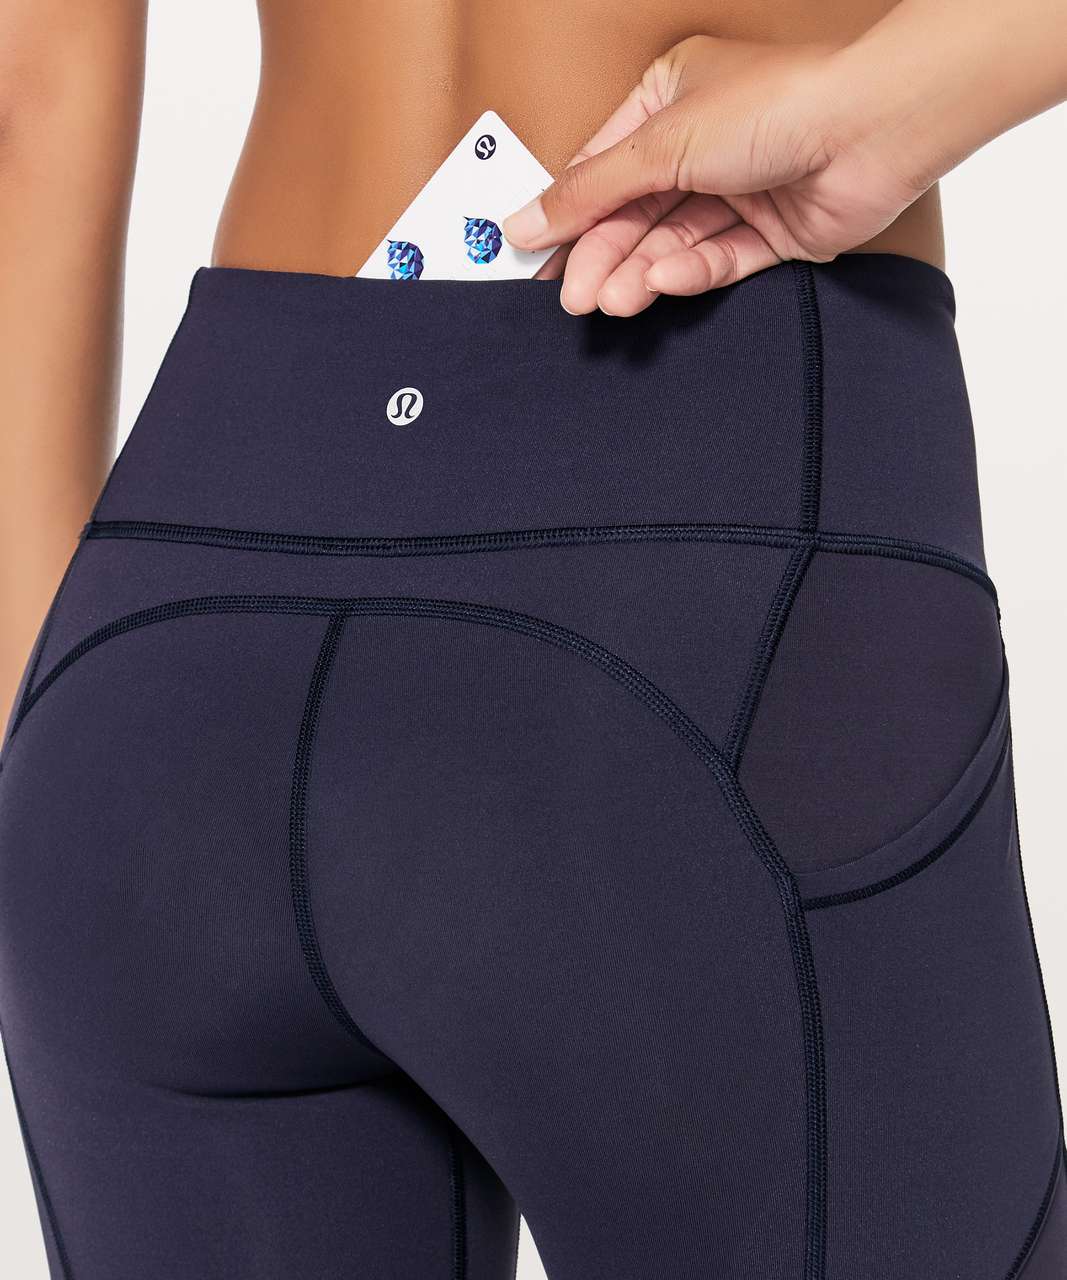 Lululemon All The Right Places Pant II *28" - Midnight Navy